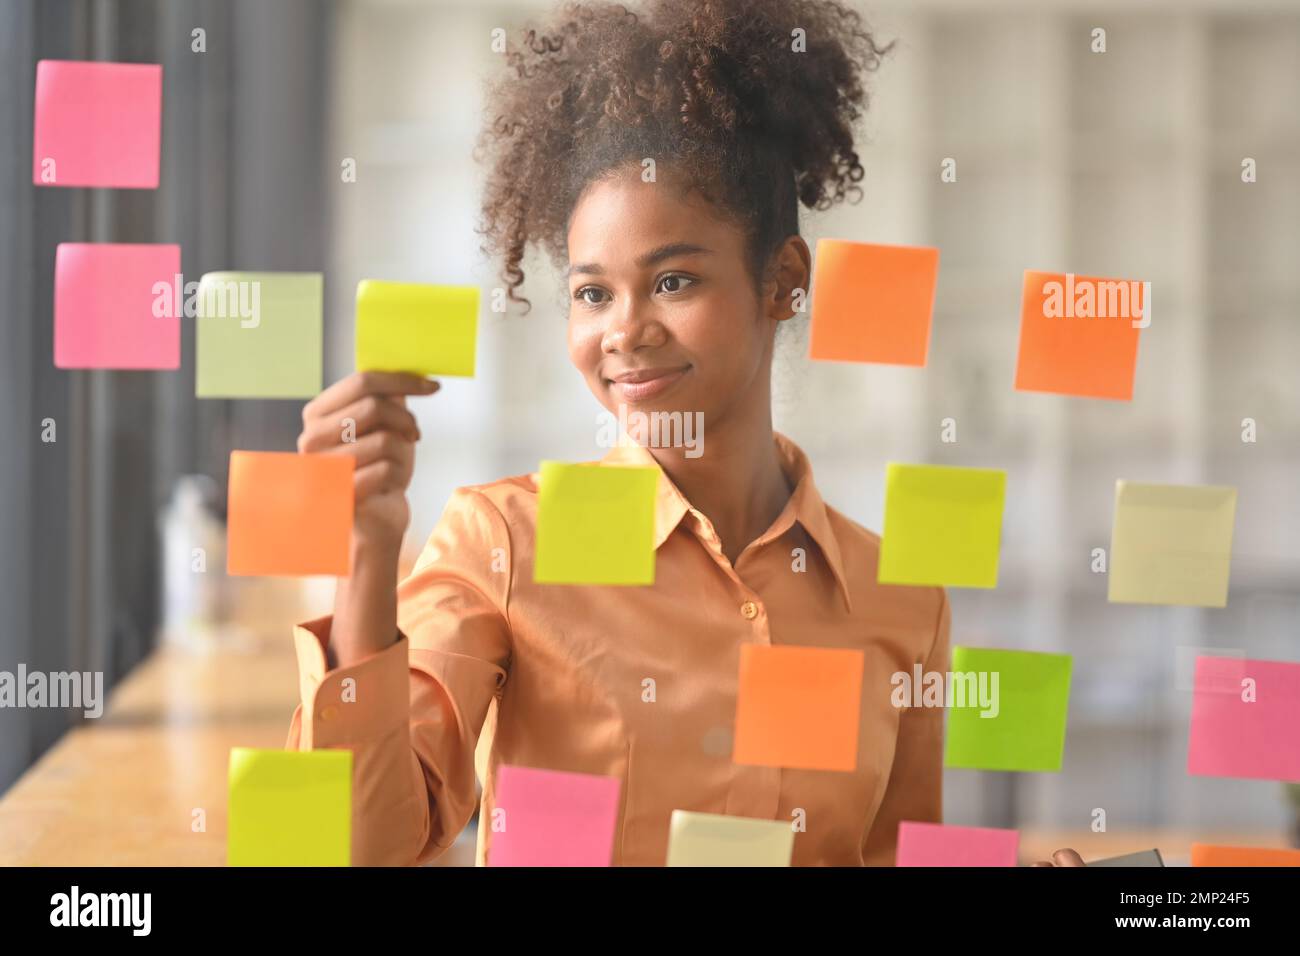 Brainstorm board post it editorial stock photo. Image of arranged - 45276143